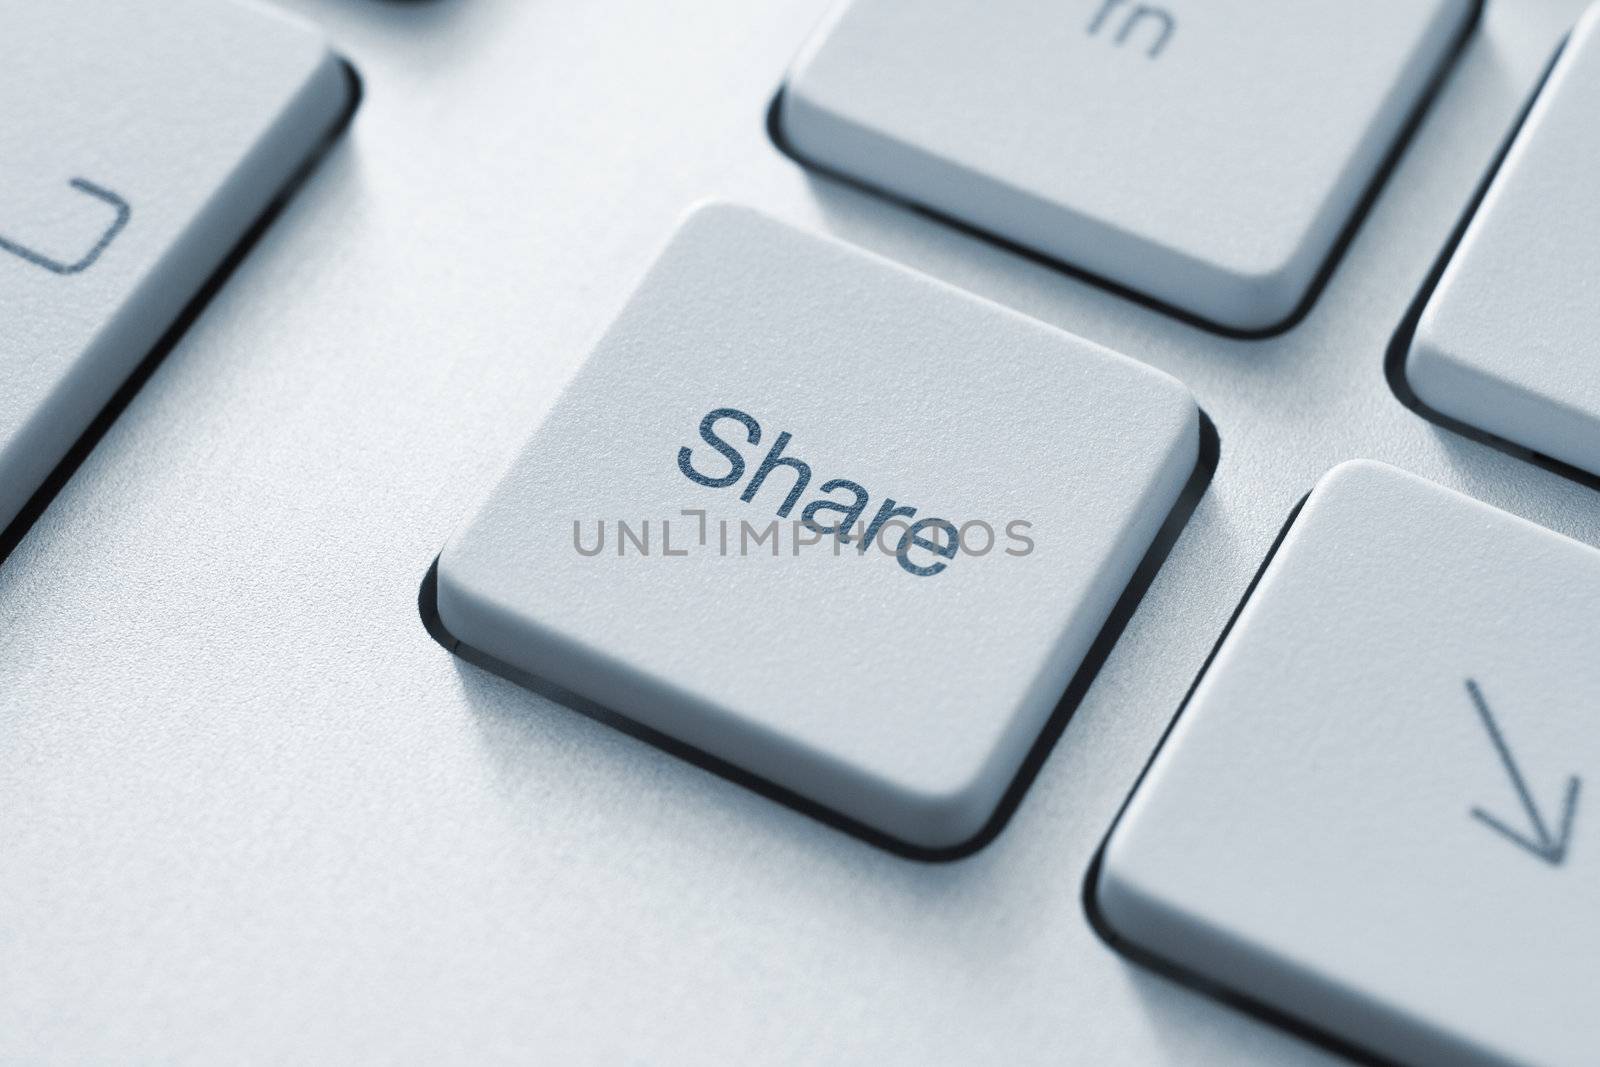 Share button on the keyboard. Toned Image.